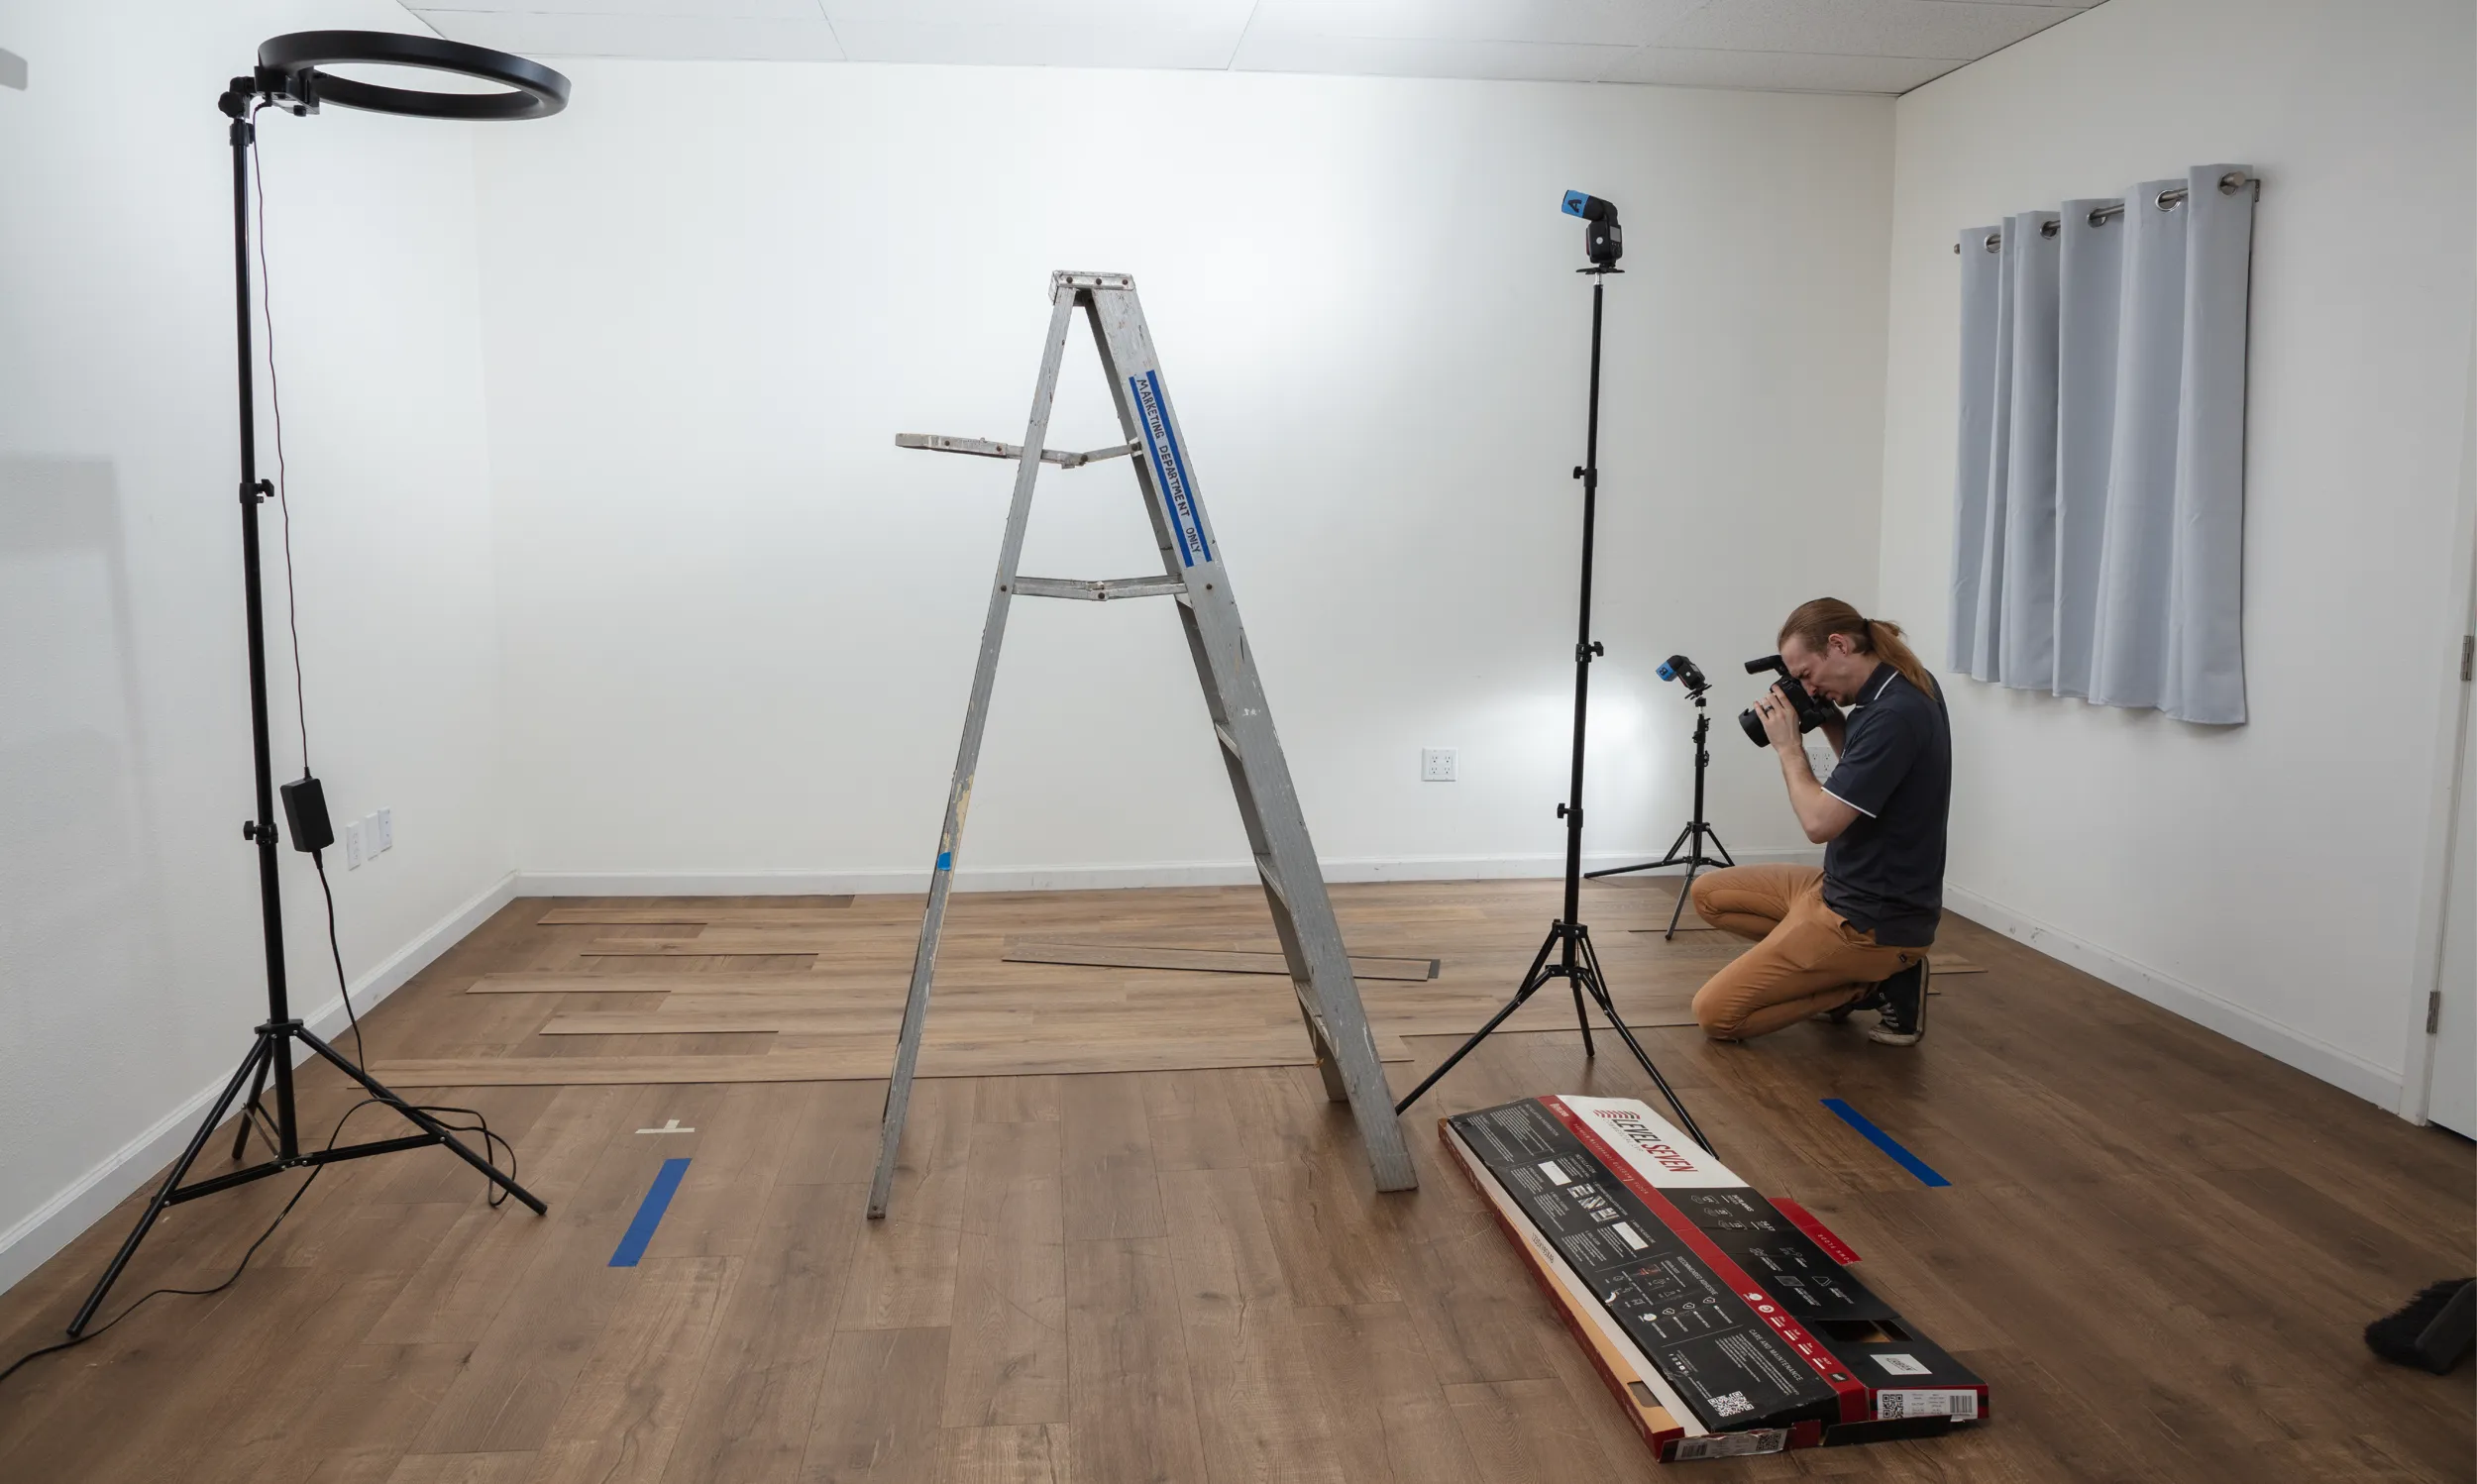 A view of a small room with ladder, lighting, plank boxes, and Chris taking photos of the installed floor